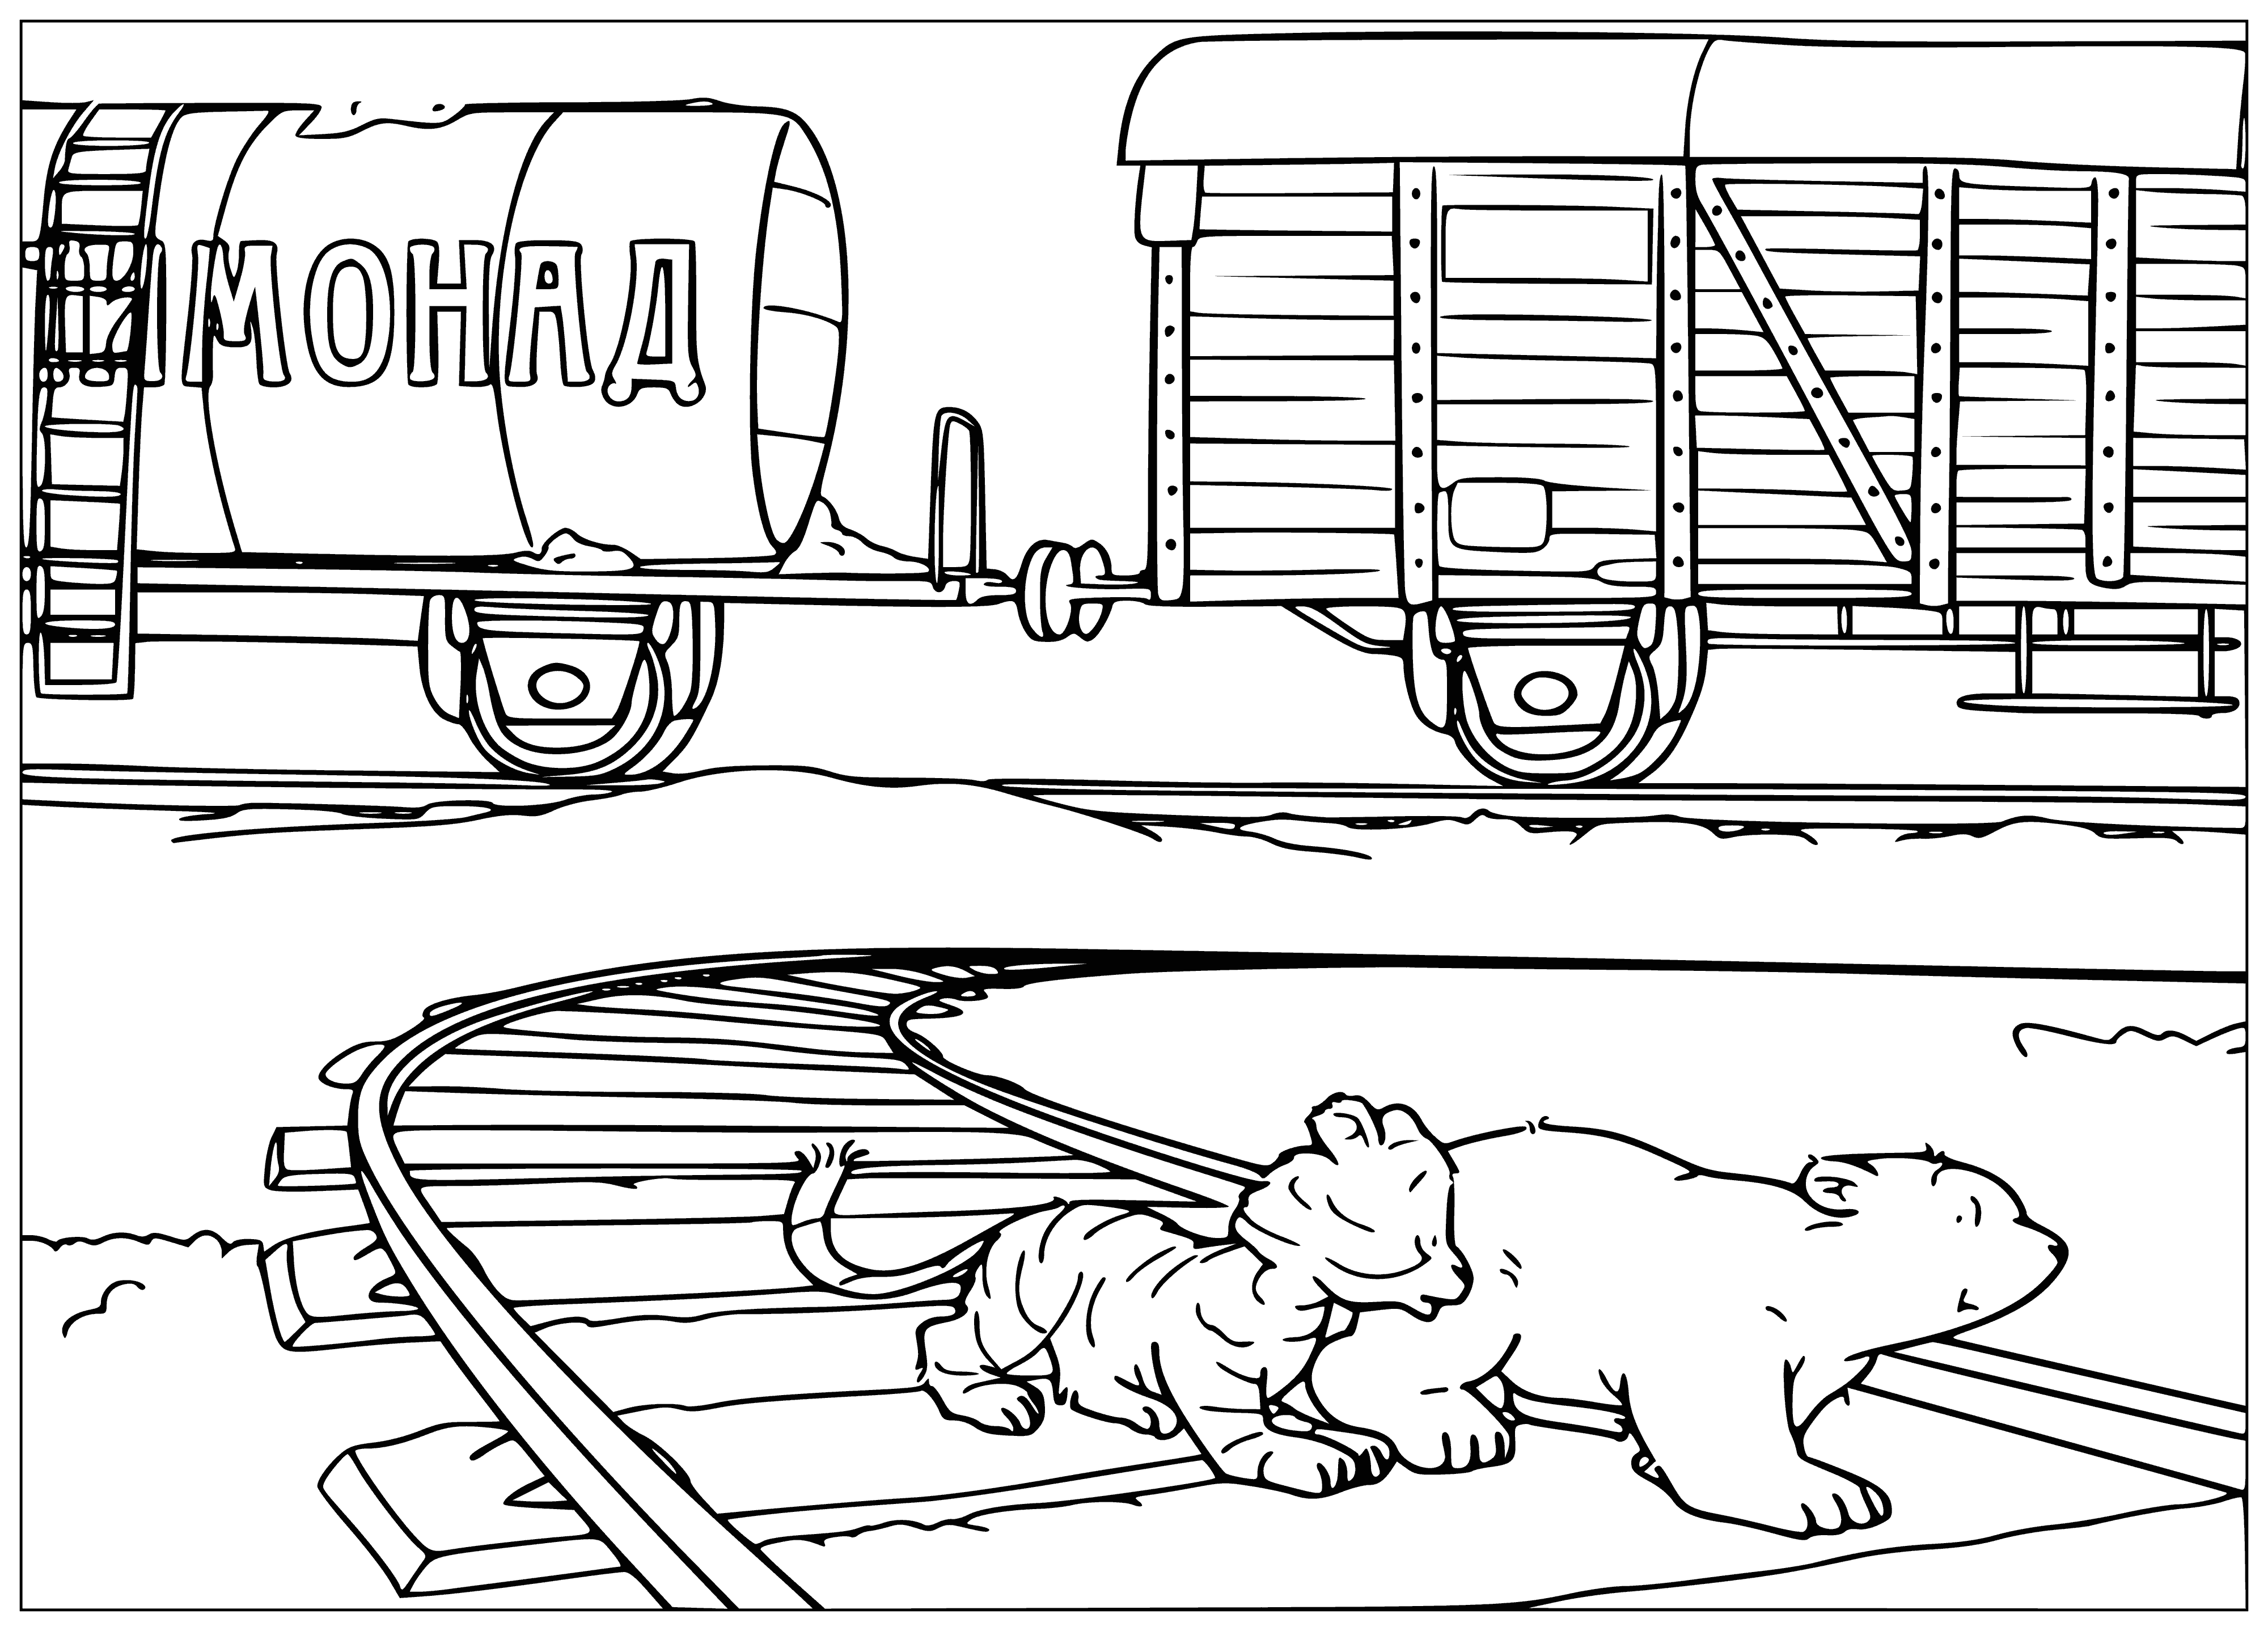 coloring page: Two cubs, a polar bear and tiger, cuddle a teddy bear with a green ribbon around its neck.